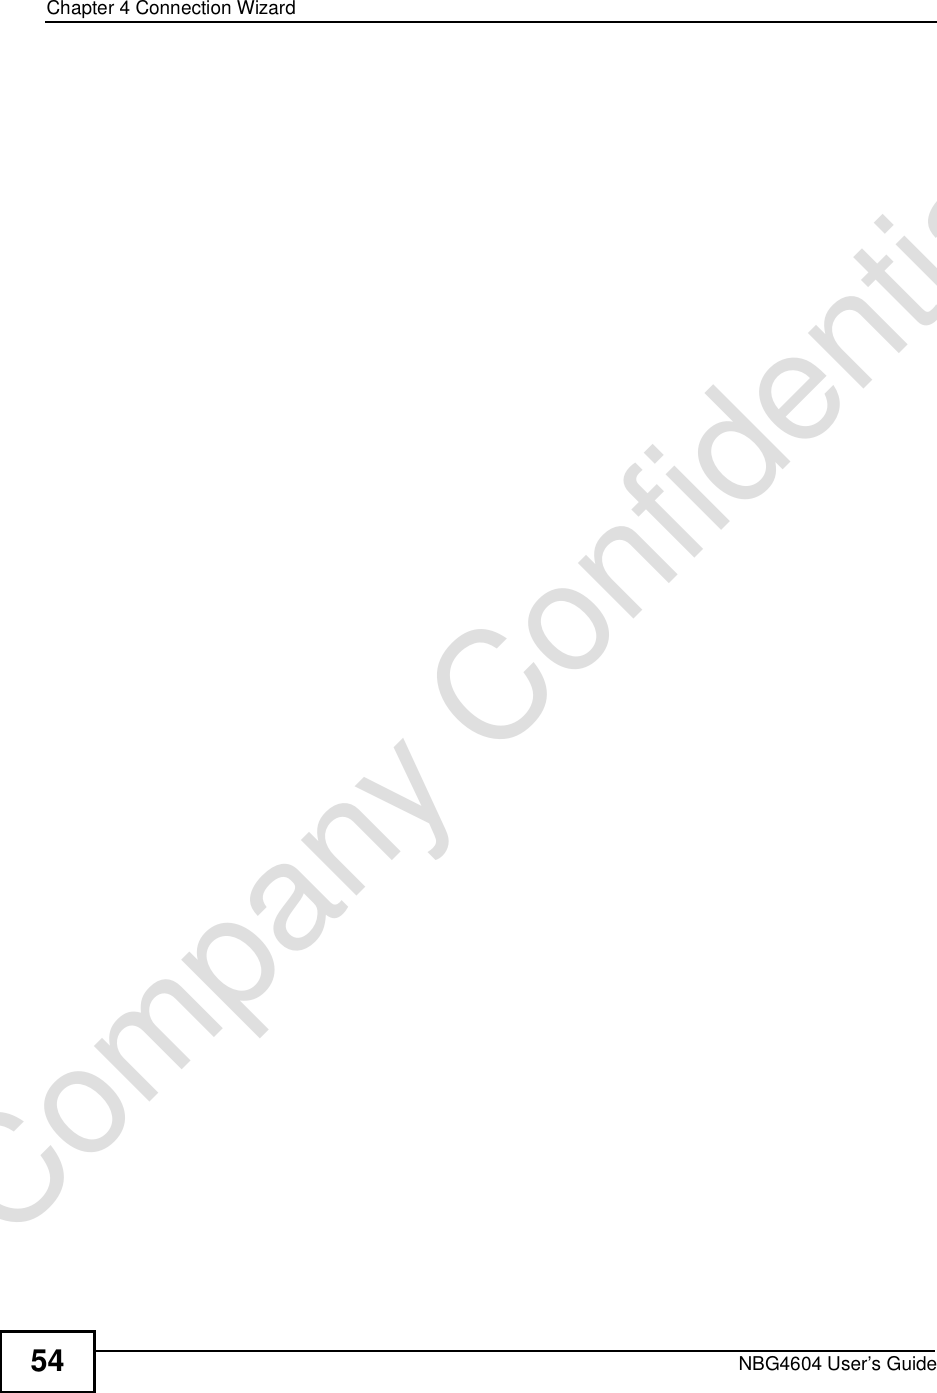 Chapter 4Connection WizardNBG4604 User’s Guide54Company Confidential